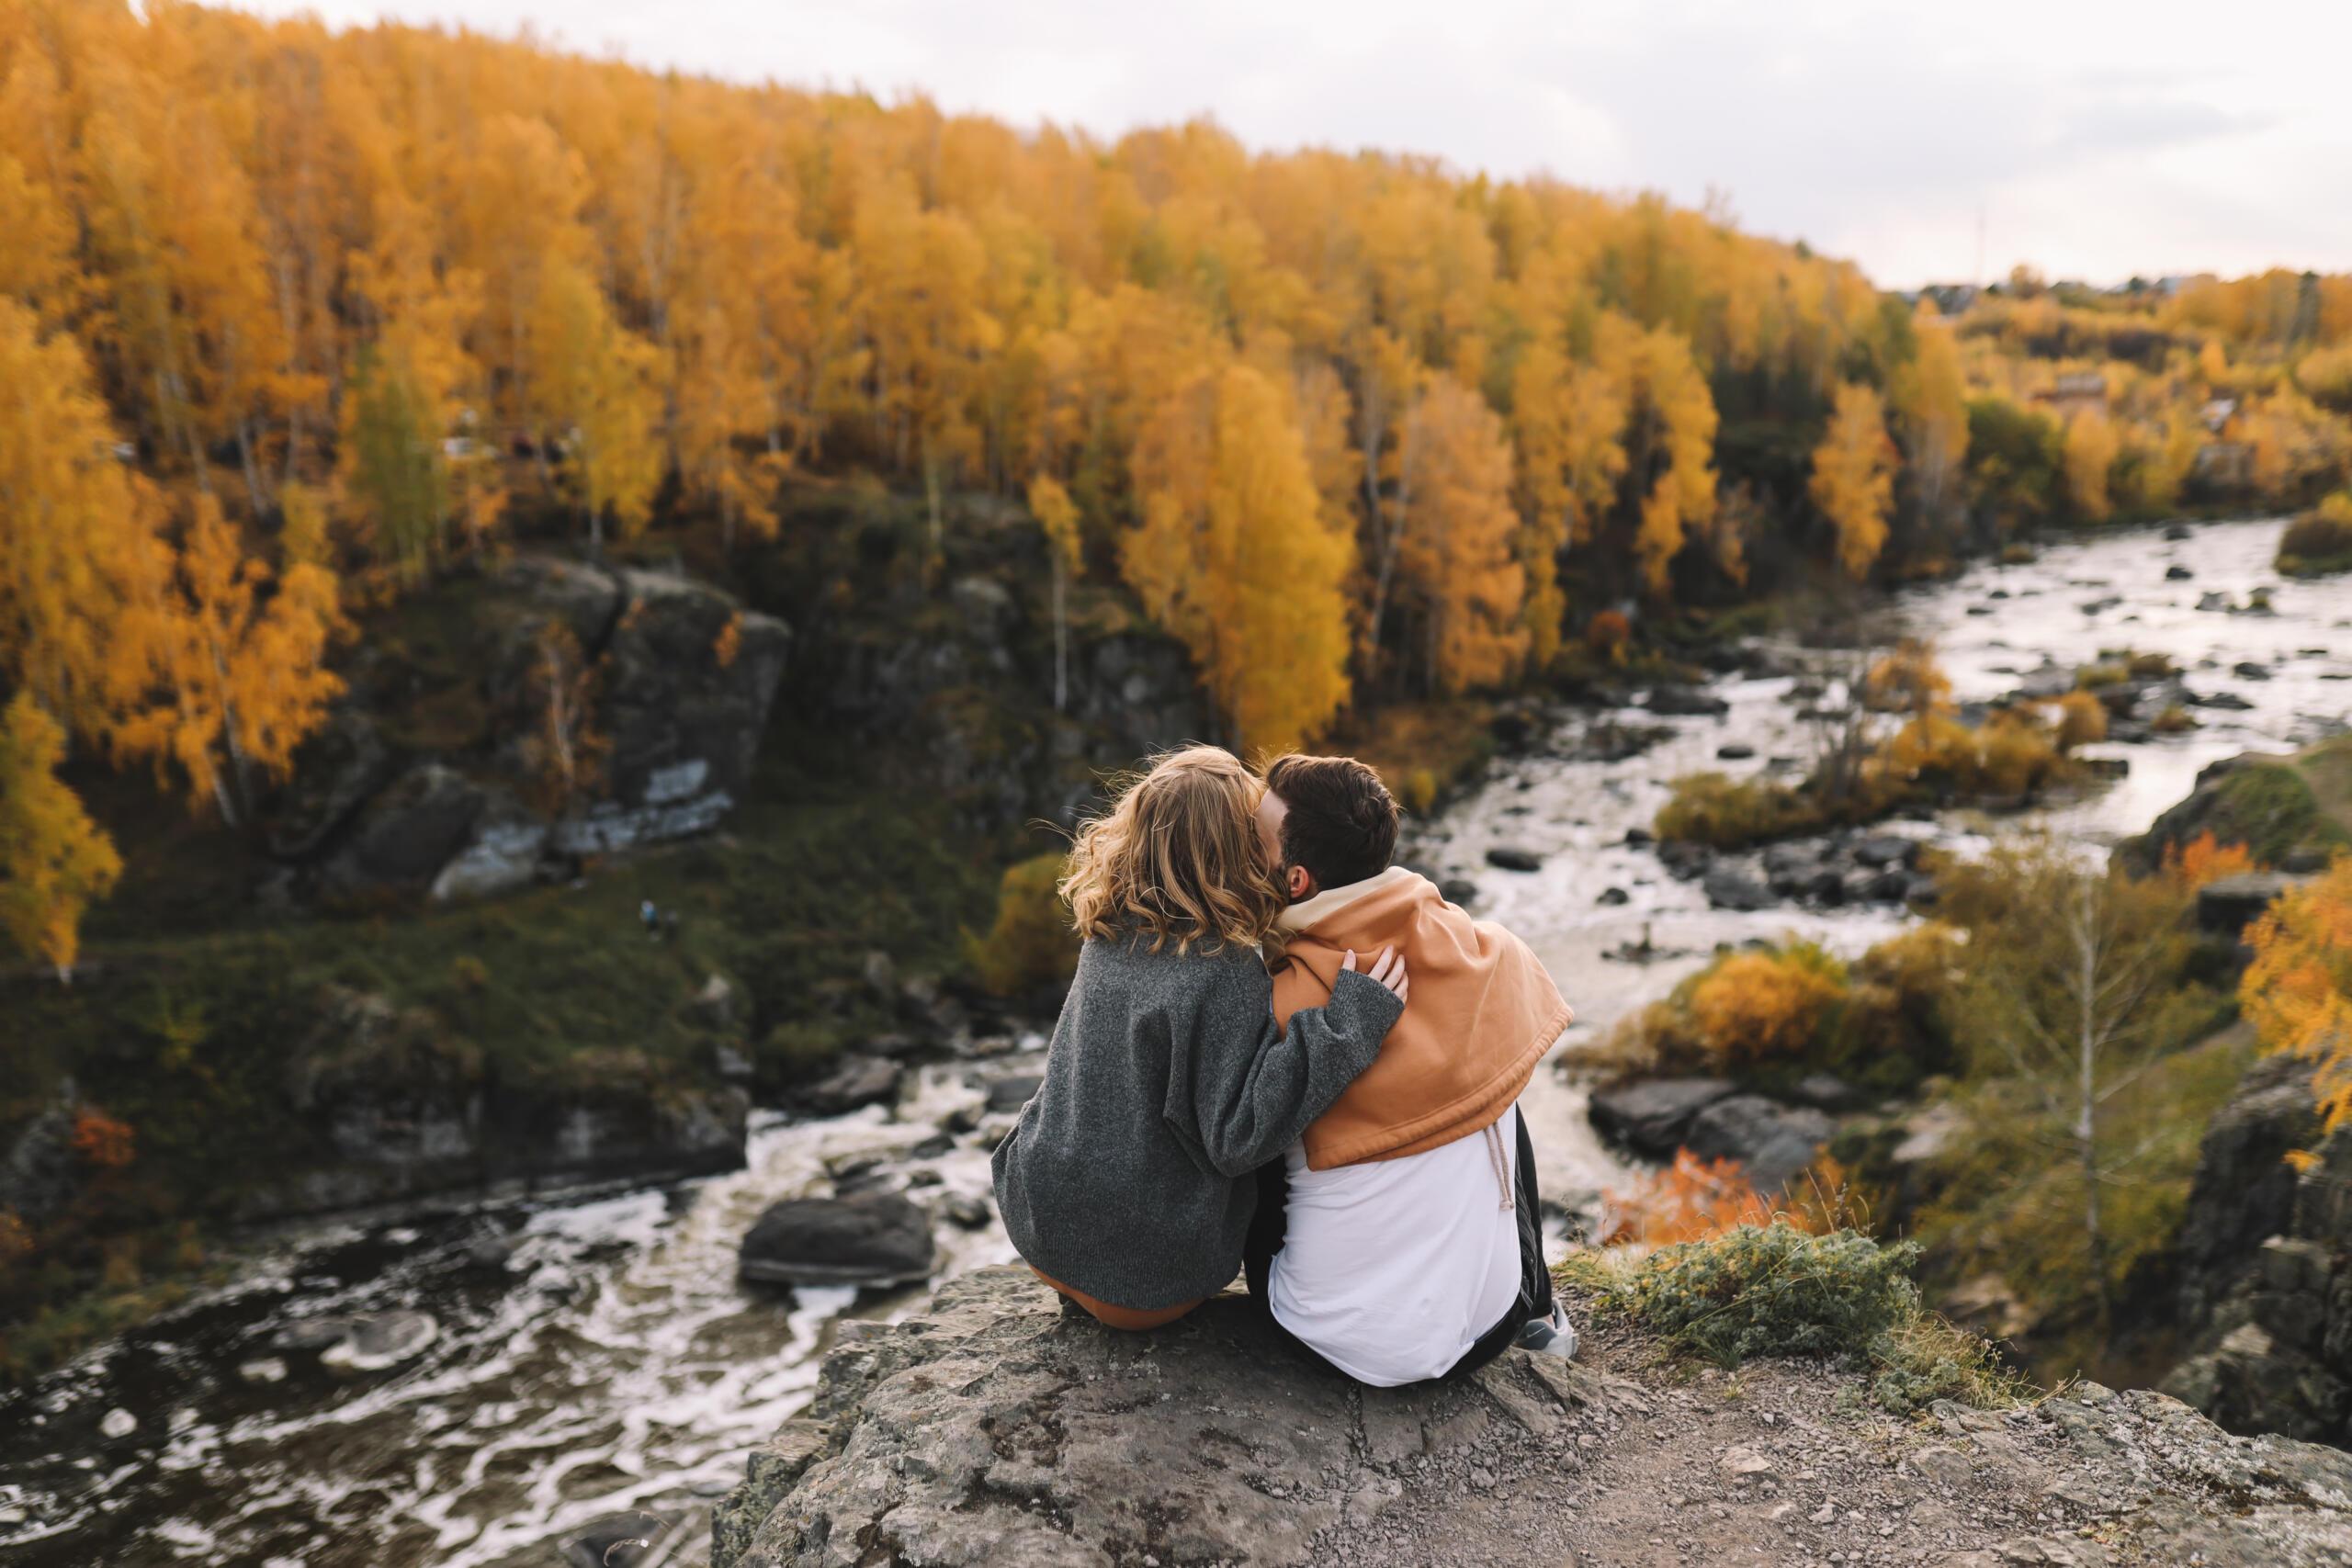 Fun Fall Date Ideas for Getting to Know Your Bumble Match Better